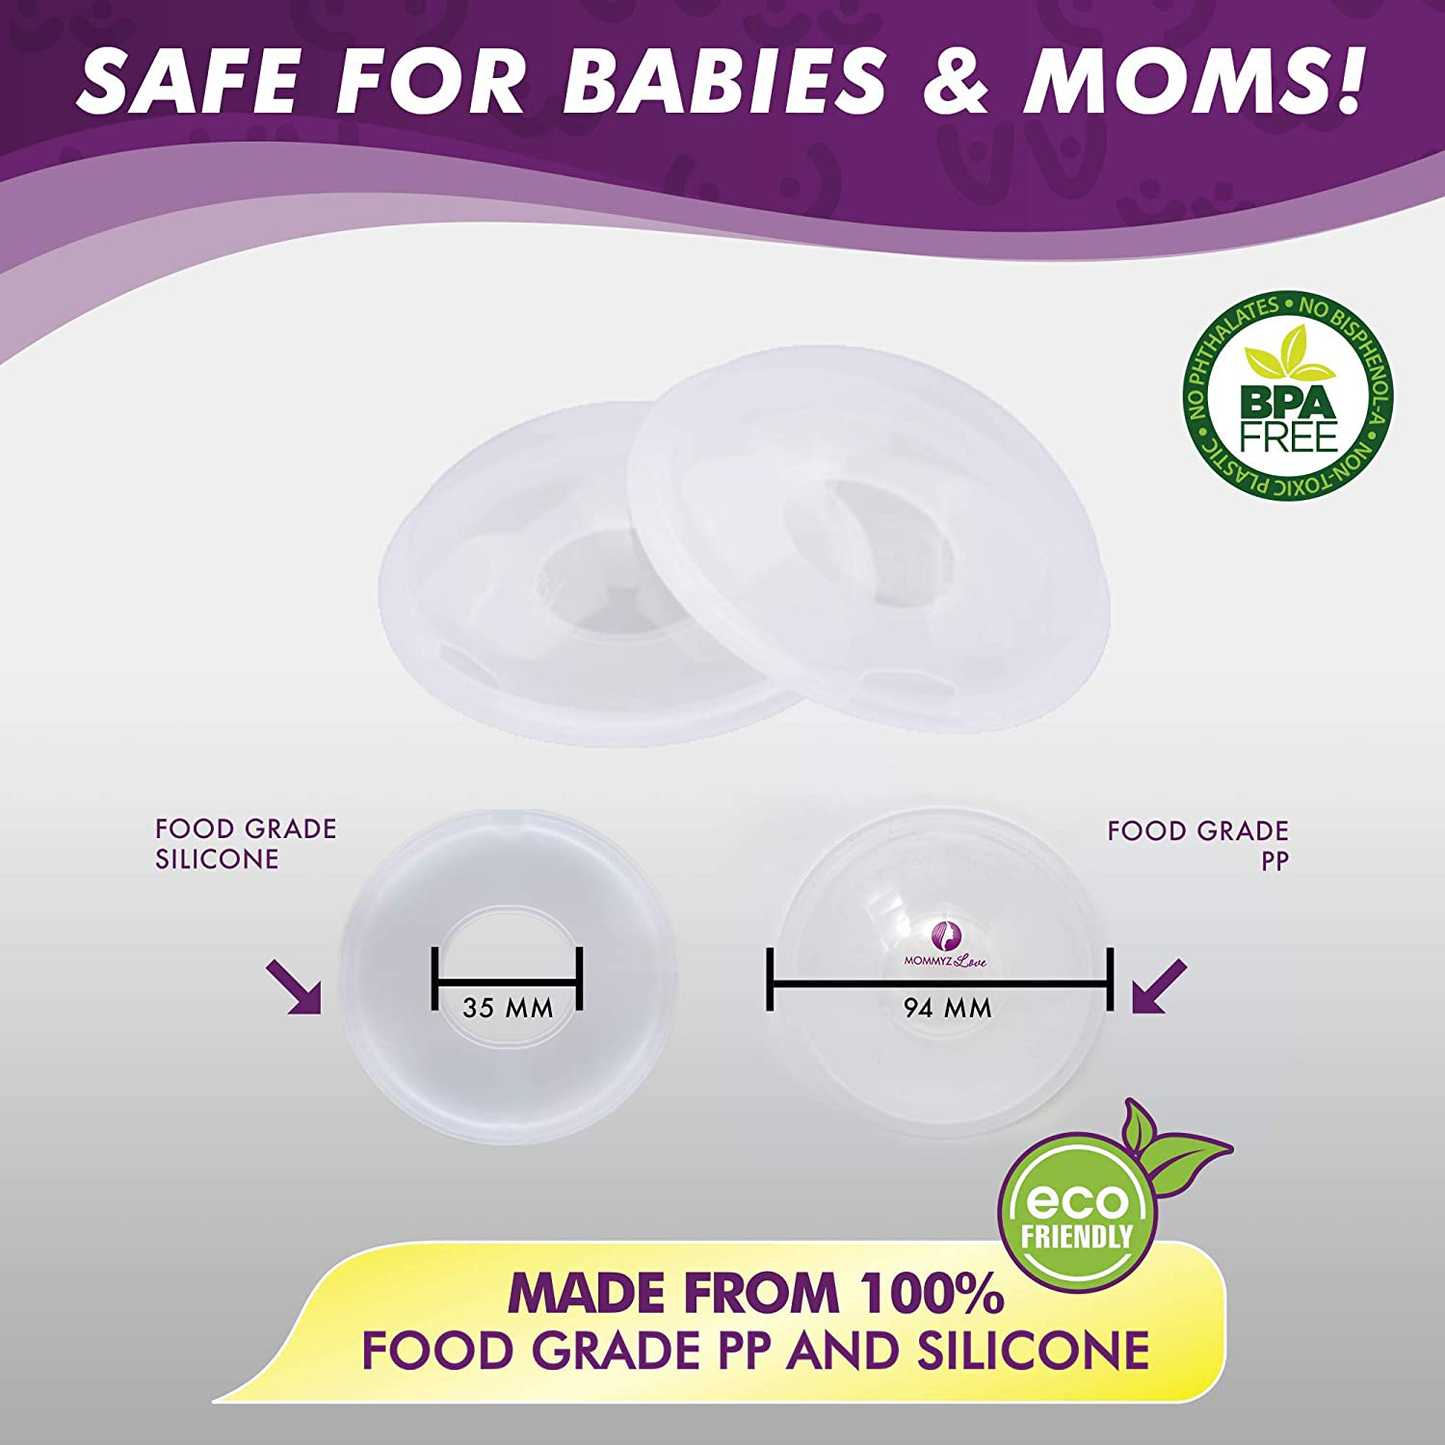 Breast Shell & Milk Catcher for Breastfeeding Relief (2 in 1) Protect Cracked, Sore, Engorged Nipples & Collect Breast Milk Leaks During The Day, While Nursing or Pumping (4 Pack)